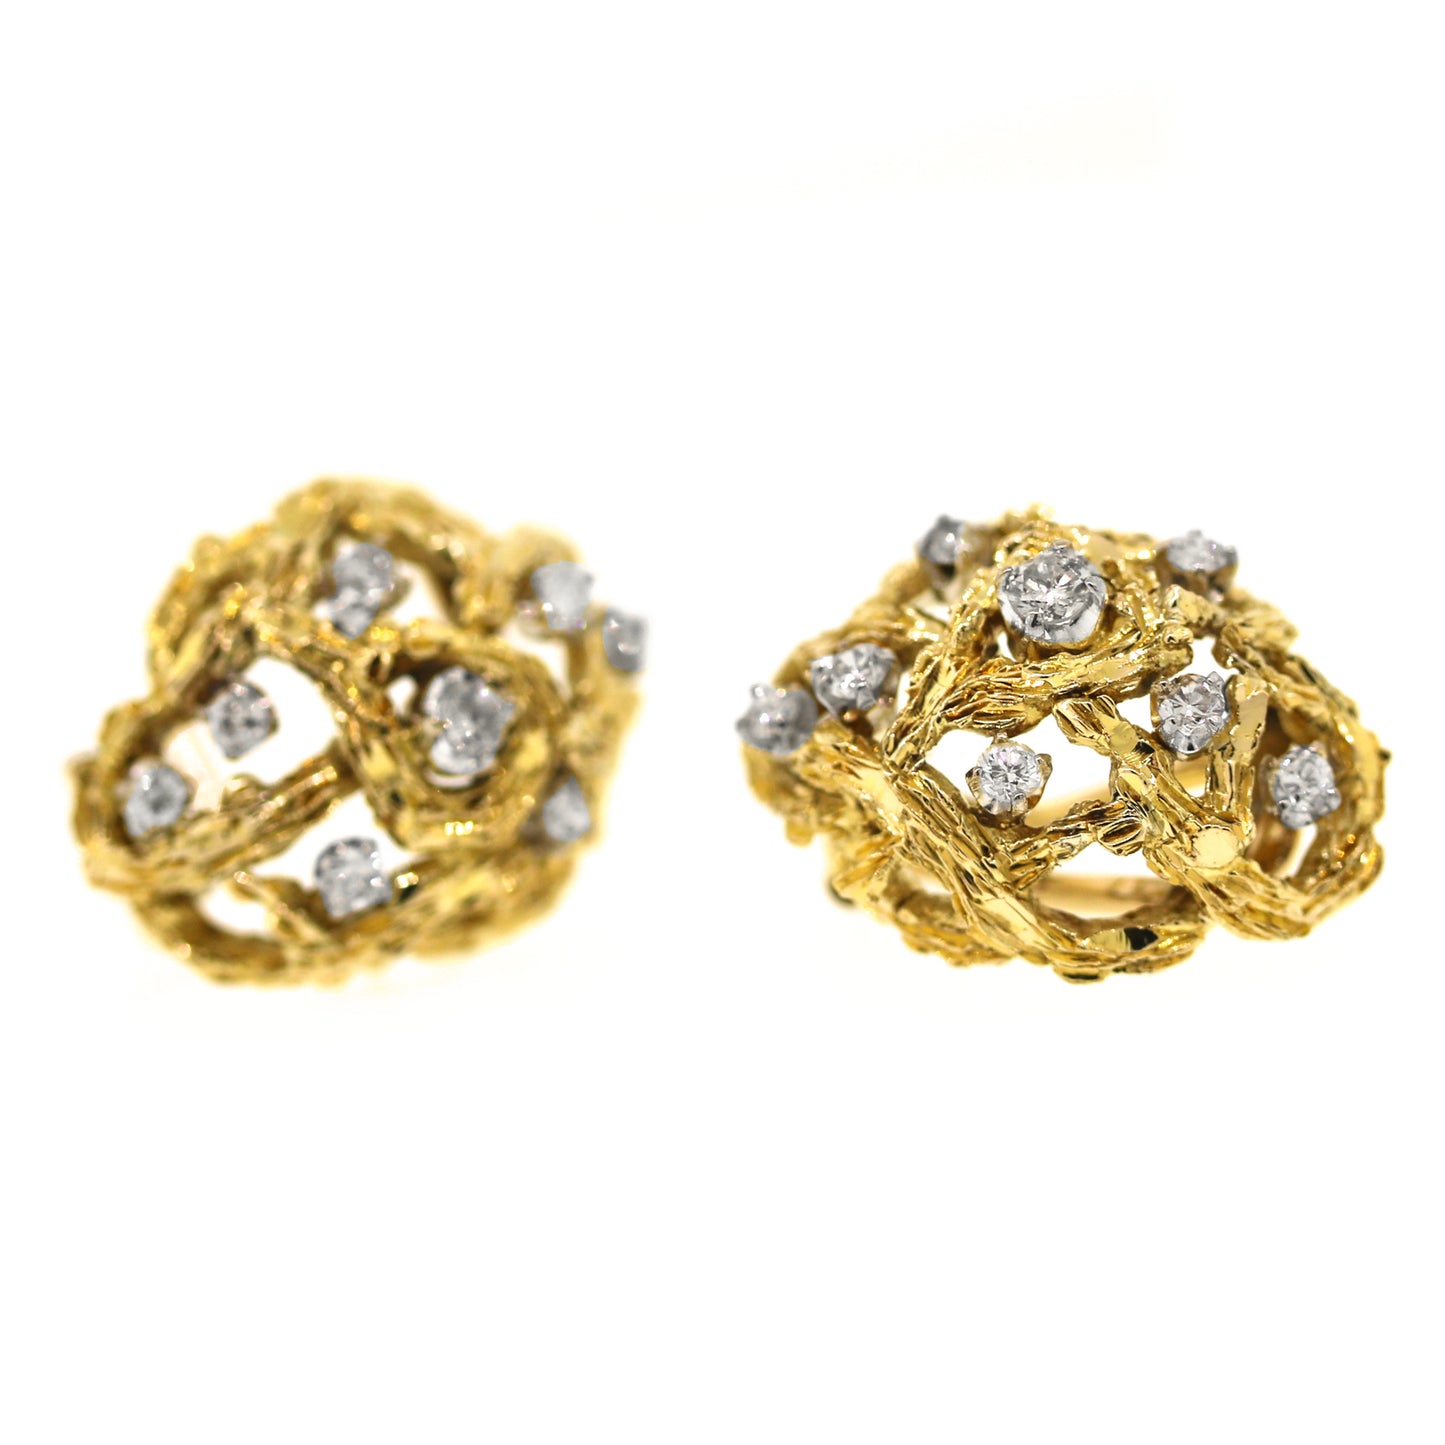 Diamond Textured Clip-on Earrings in 14k Yellow Gold